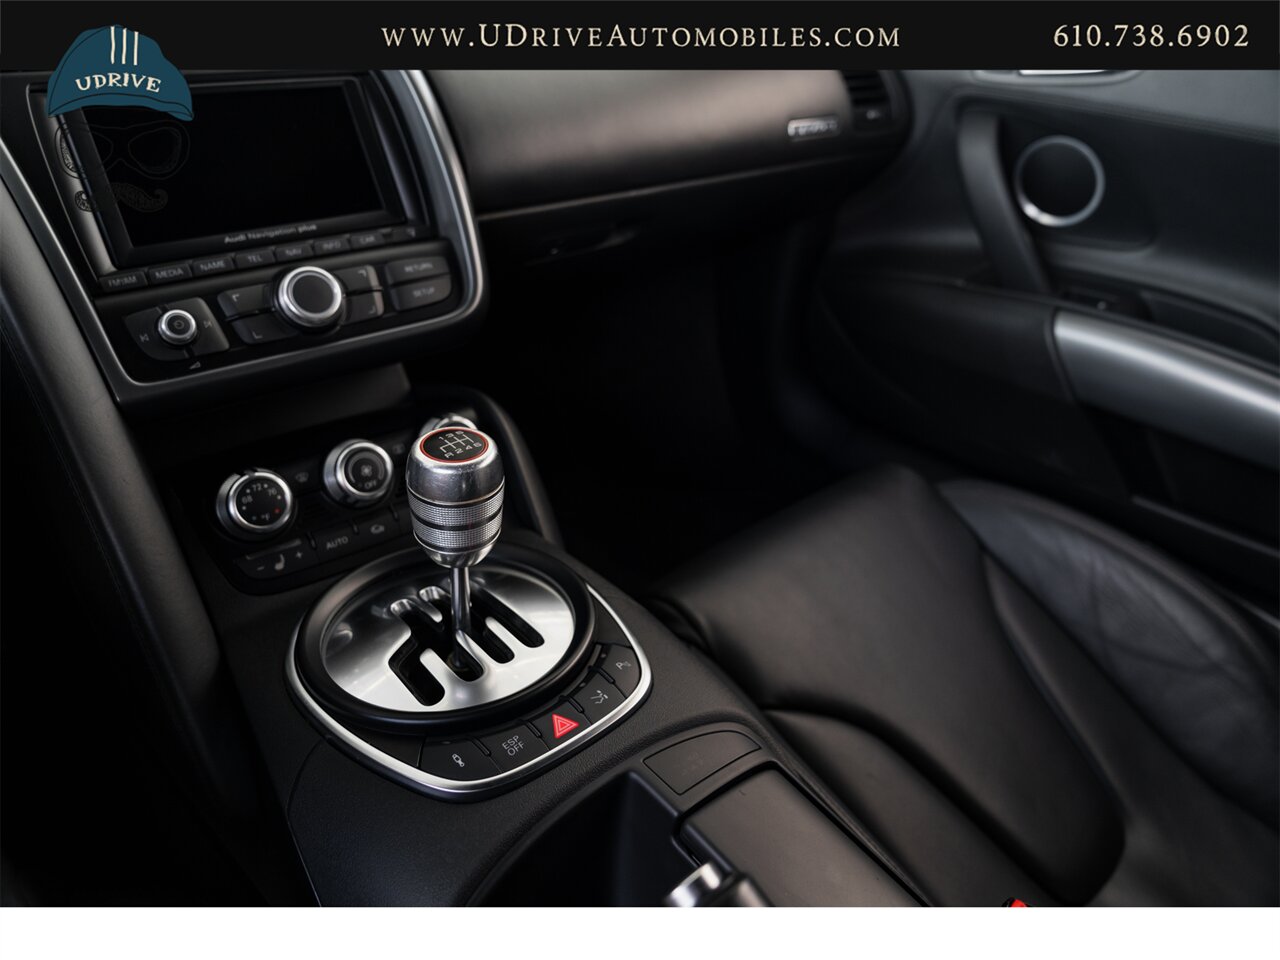 2011 Audi R8 5.2 Quattro  V10 6 Speed Manual - Photo 39 - West Chester, PA 19382